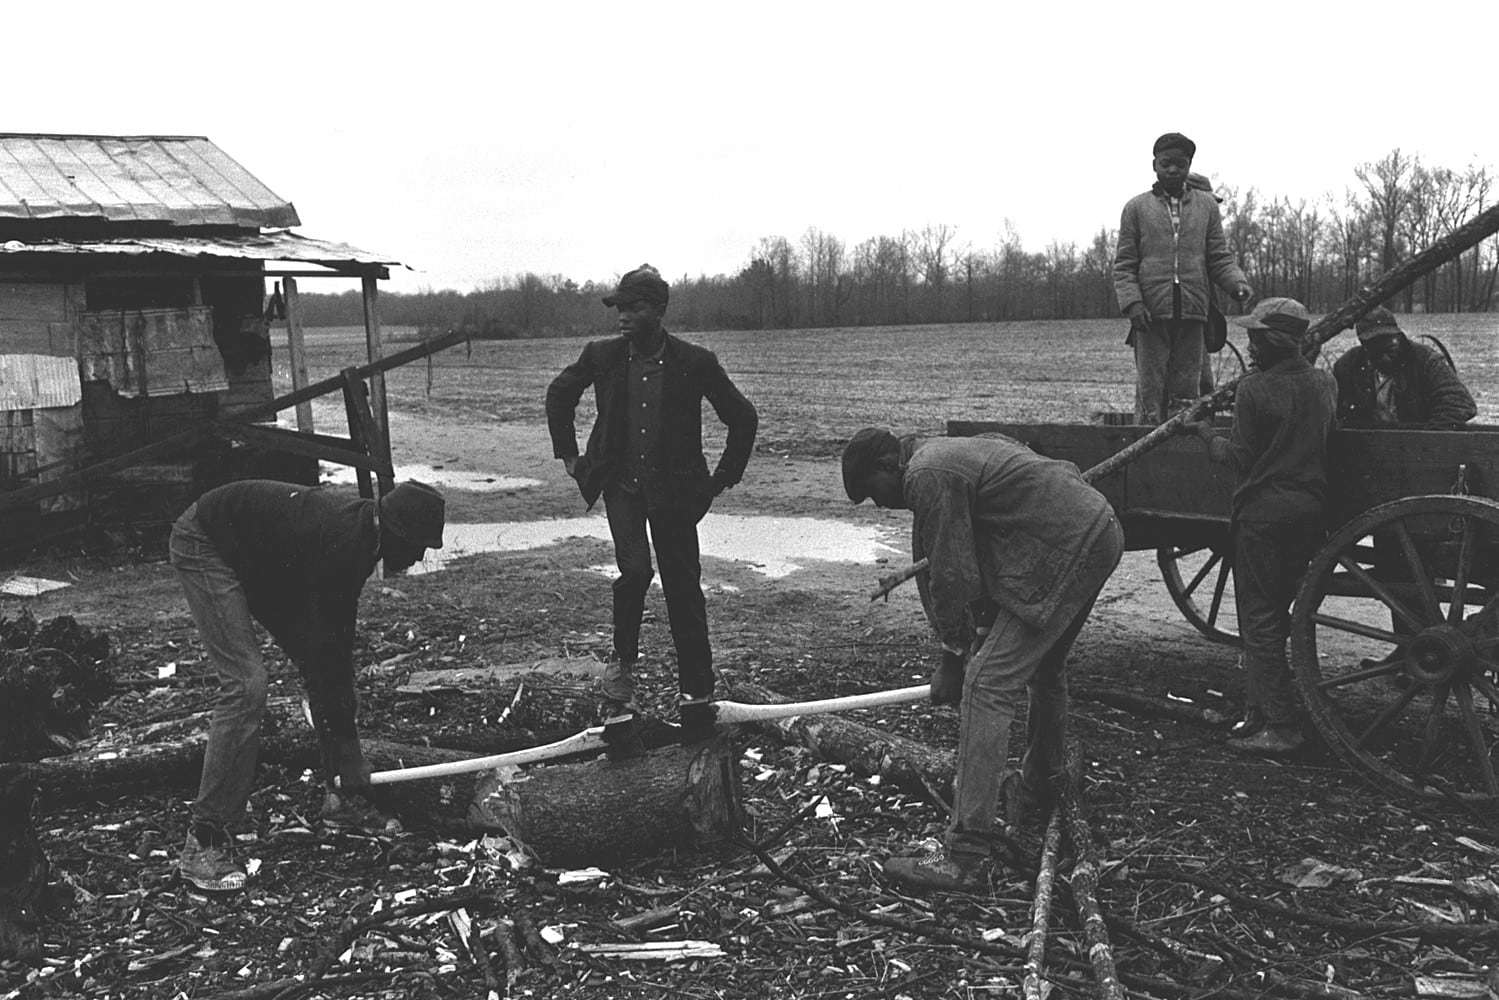 Constantine Manos, Untitled, Sharecroppers, South Carolina (6 men, chopping wood), 1965